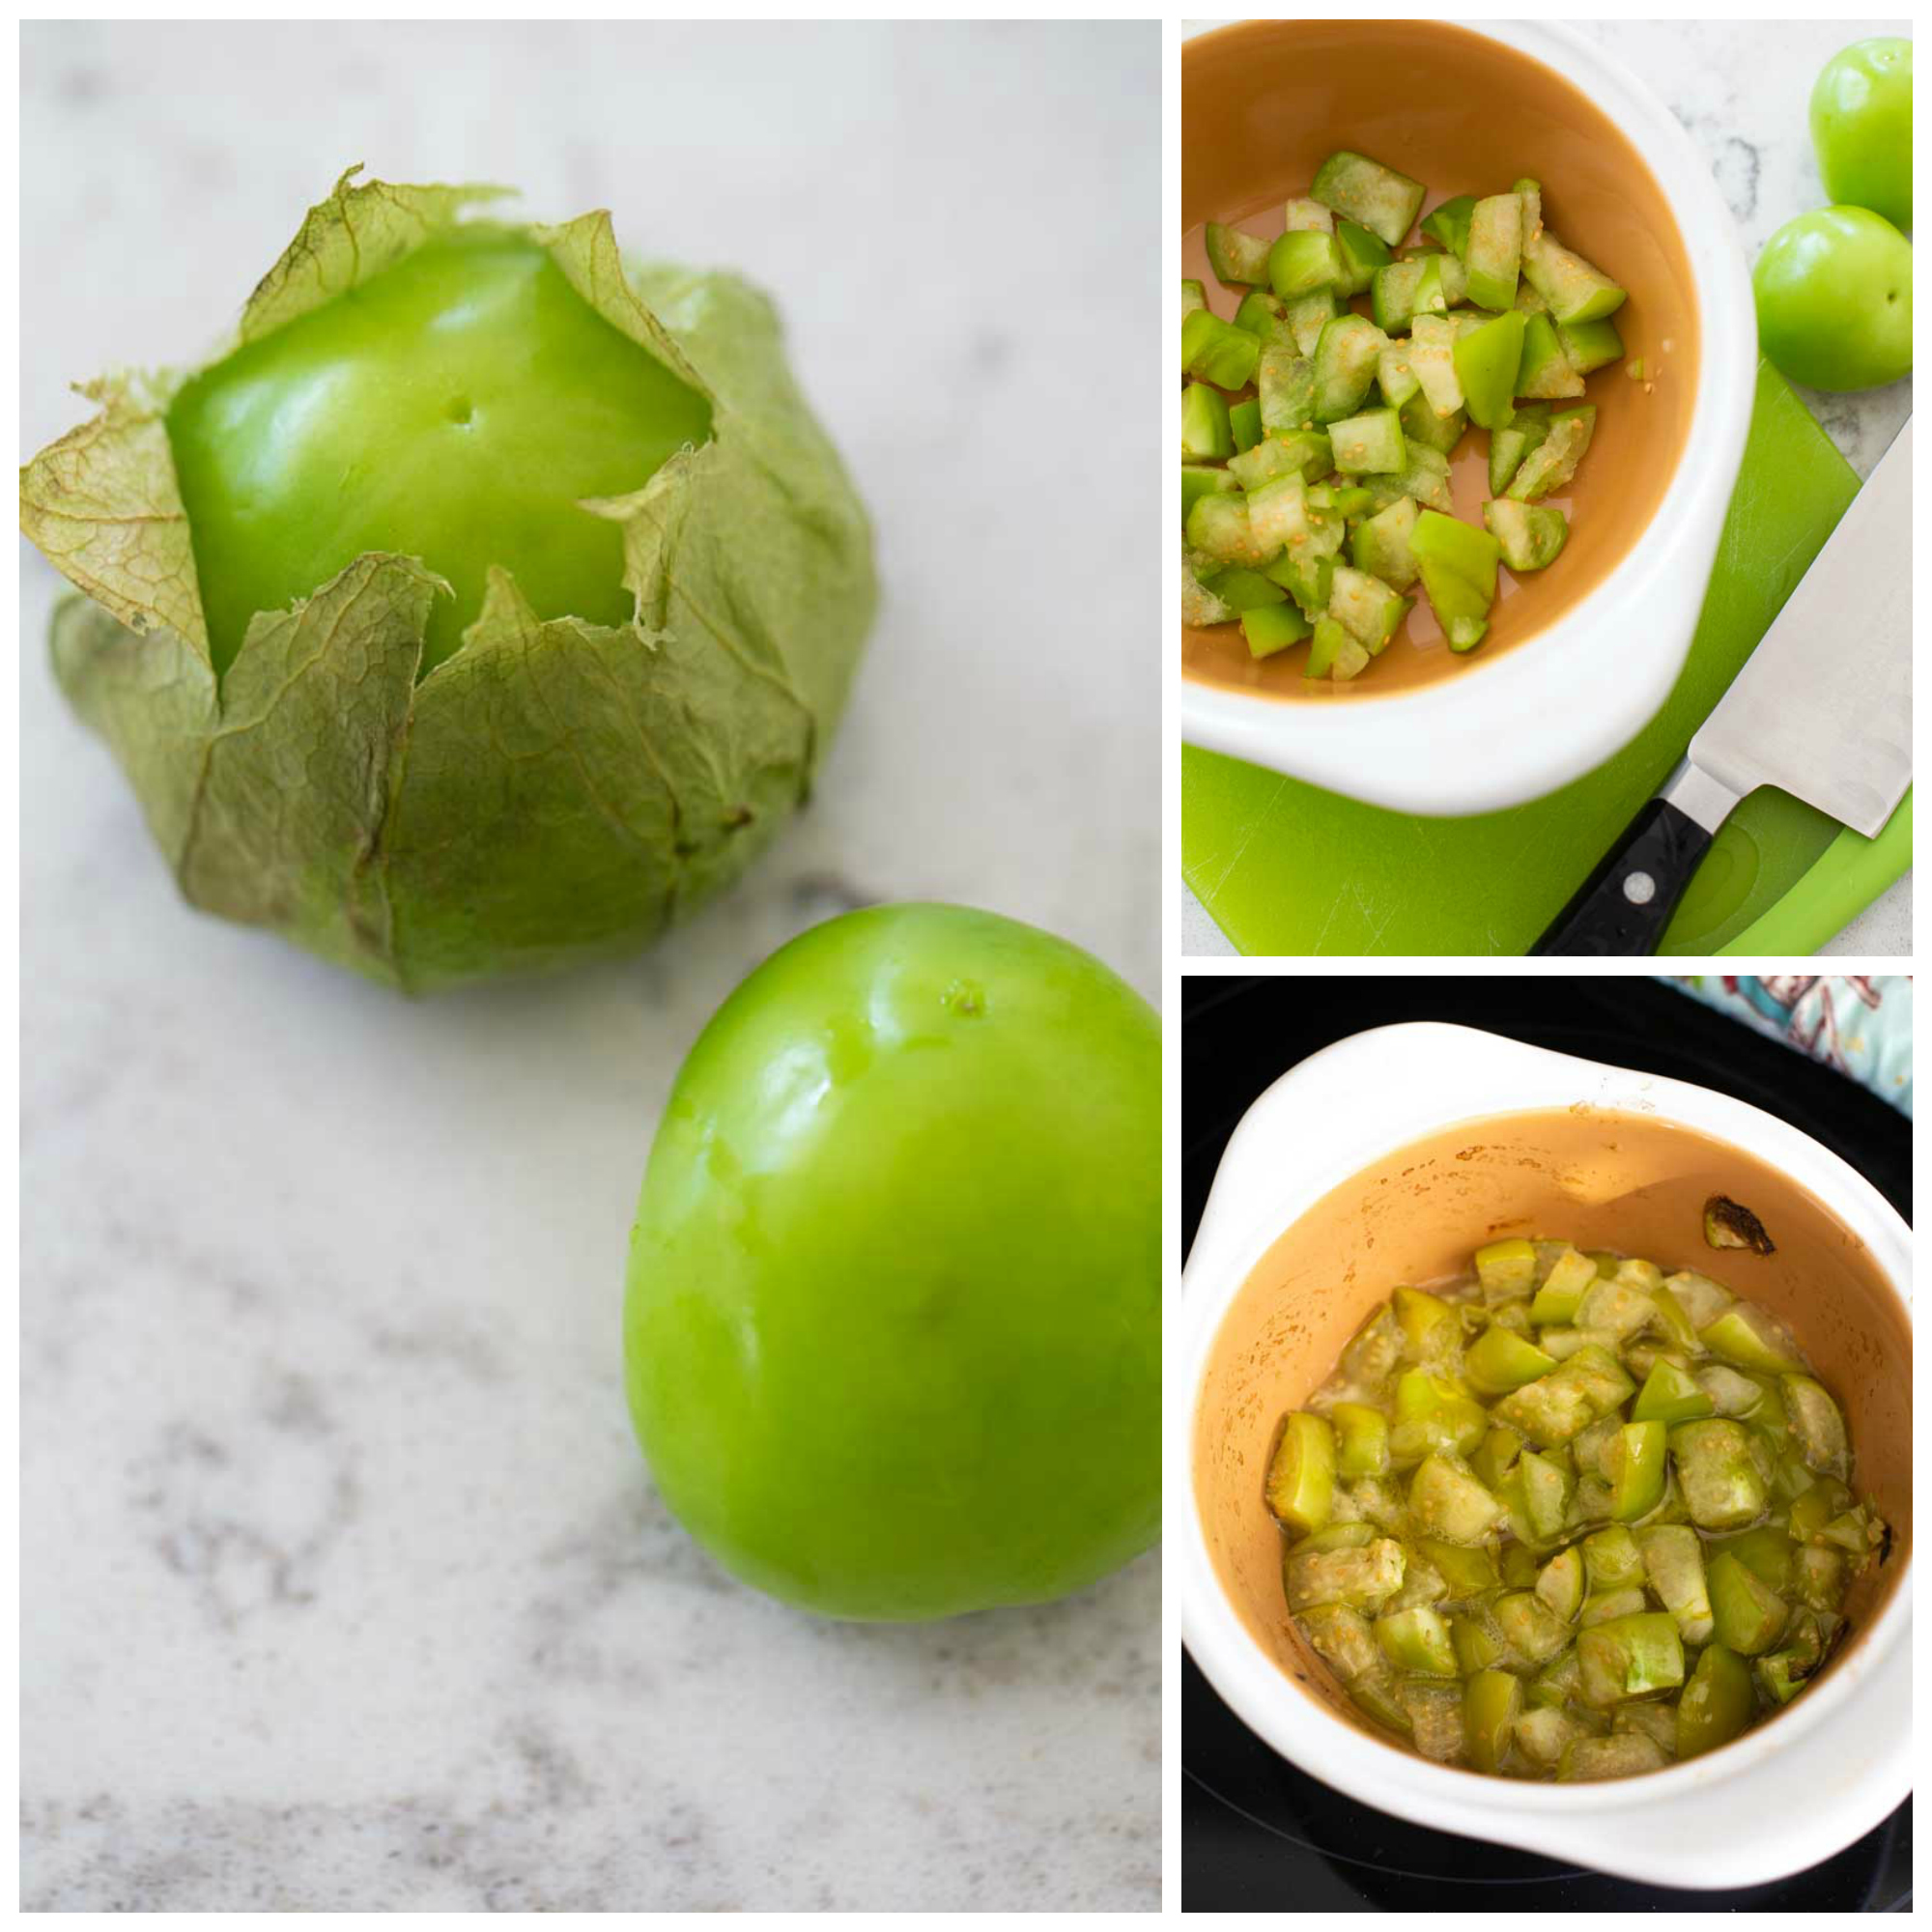 The photo collage shows the tomatillos being chopped and roasted.